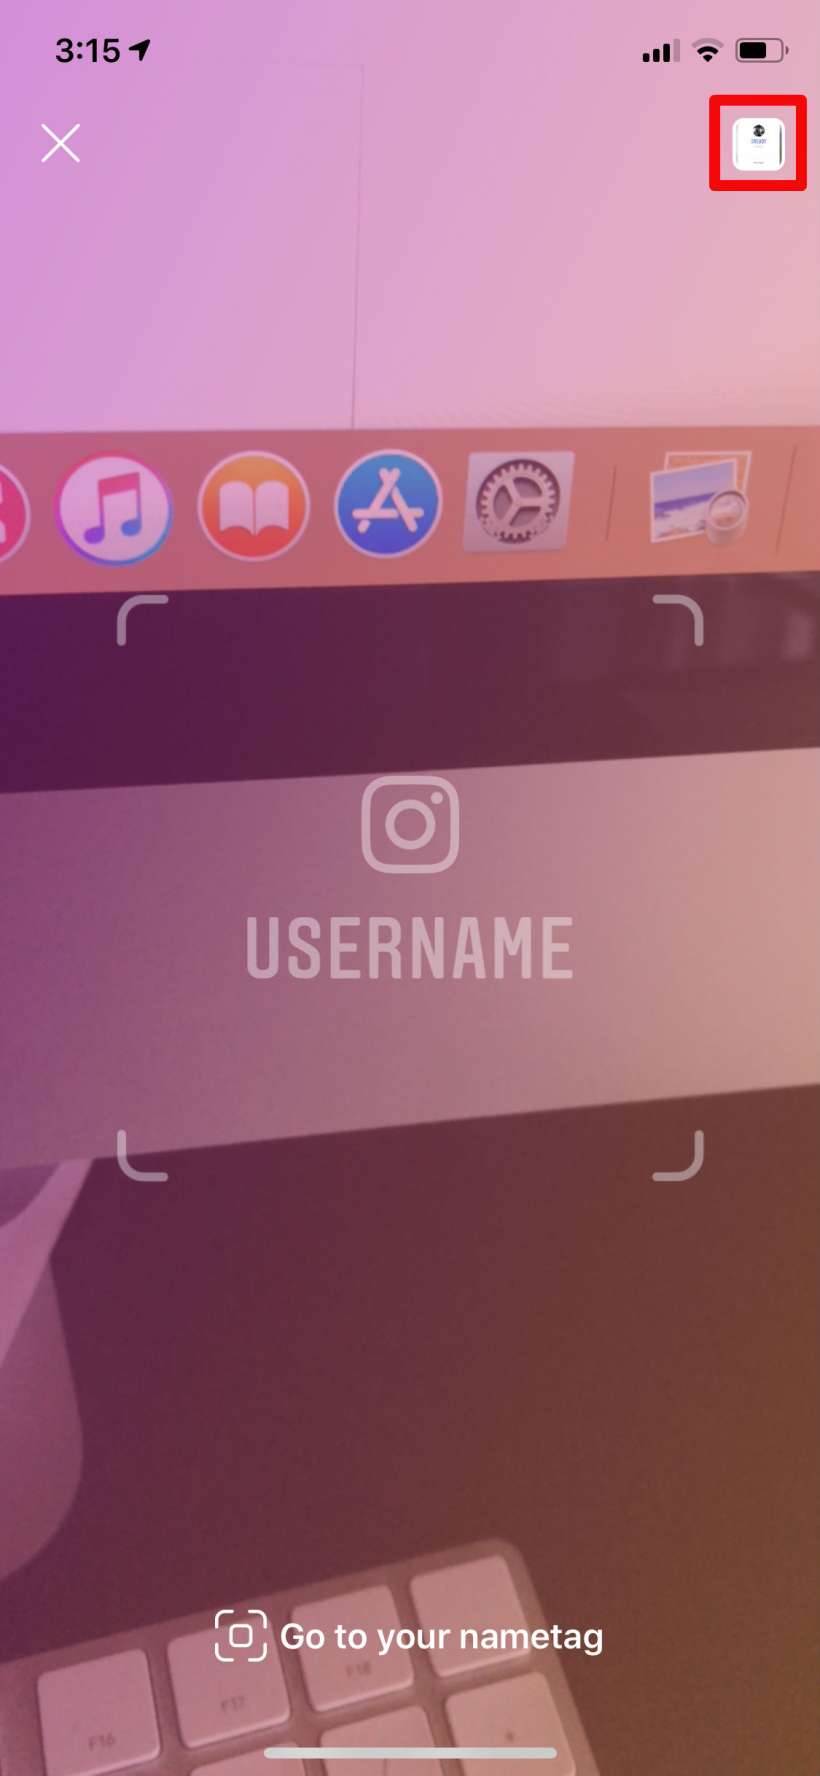 How to use nametags in Instagram for iPhone and iPad.